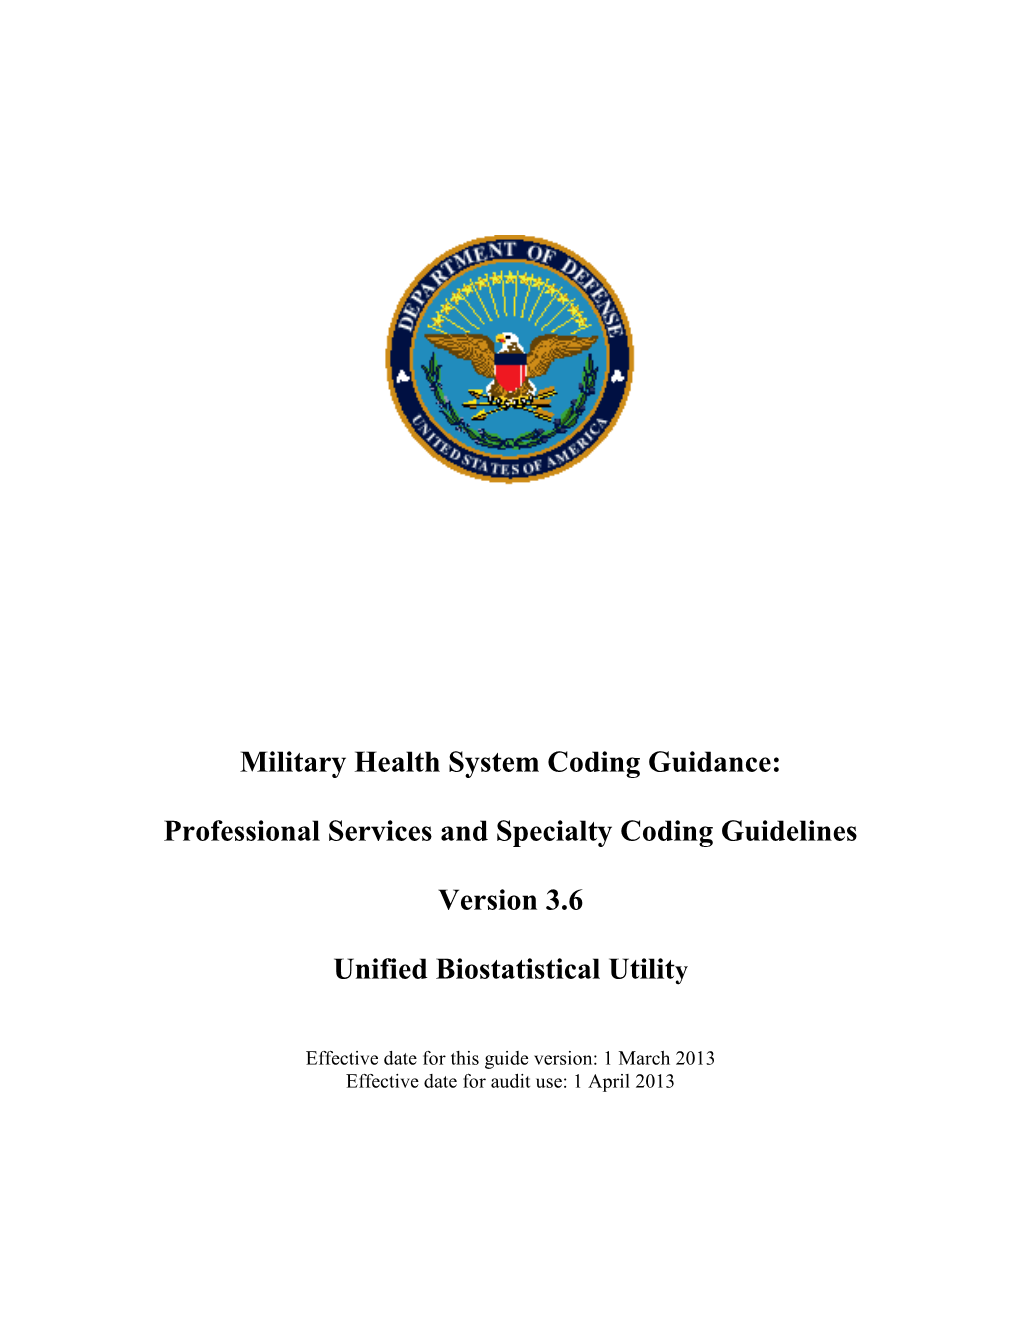 Military Health System Coding Guidance: Professional Services